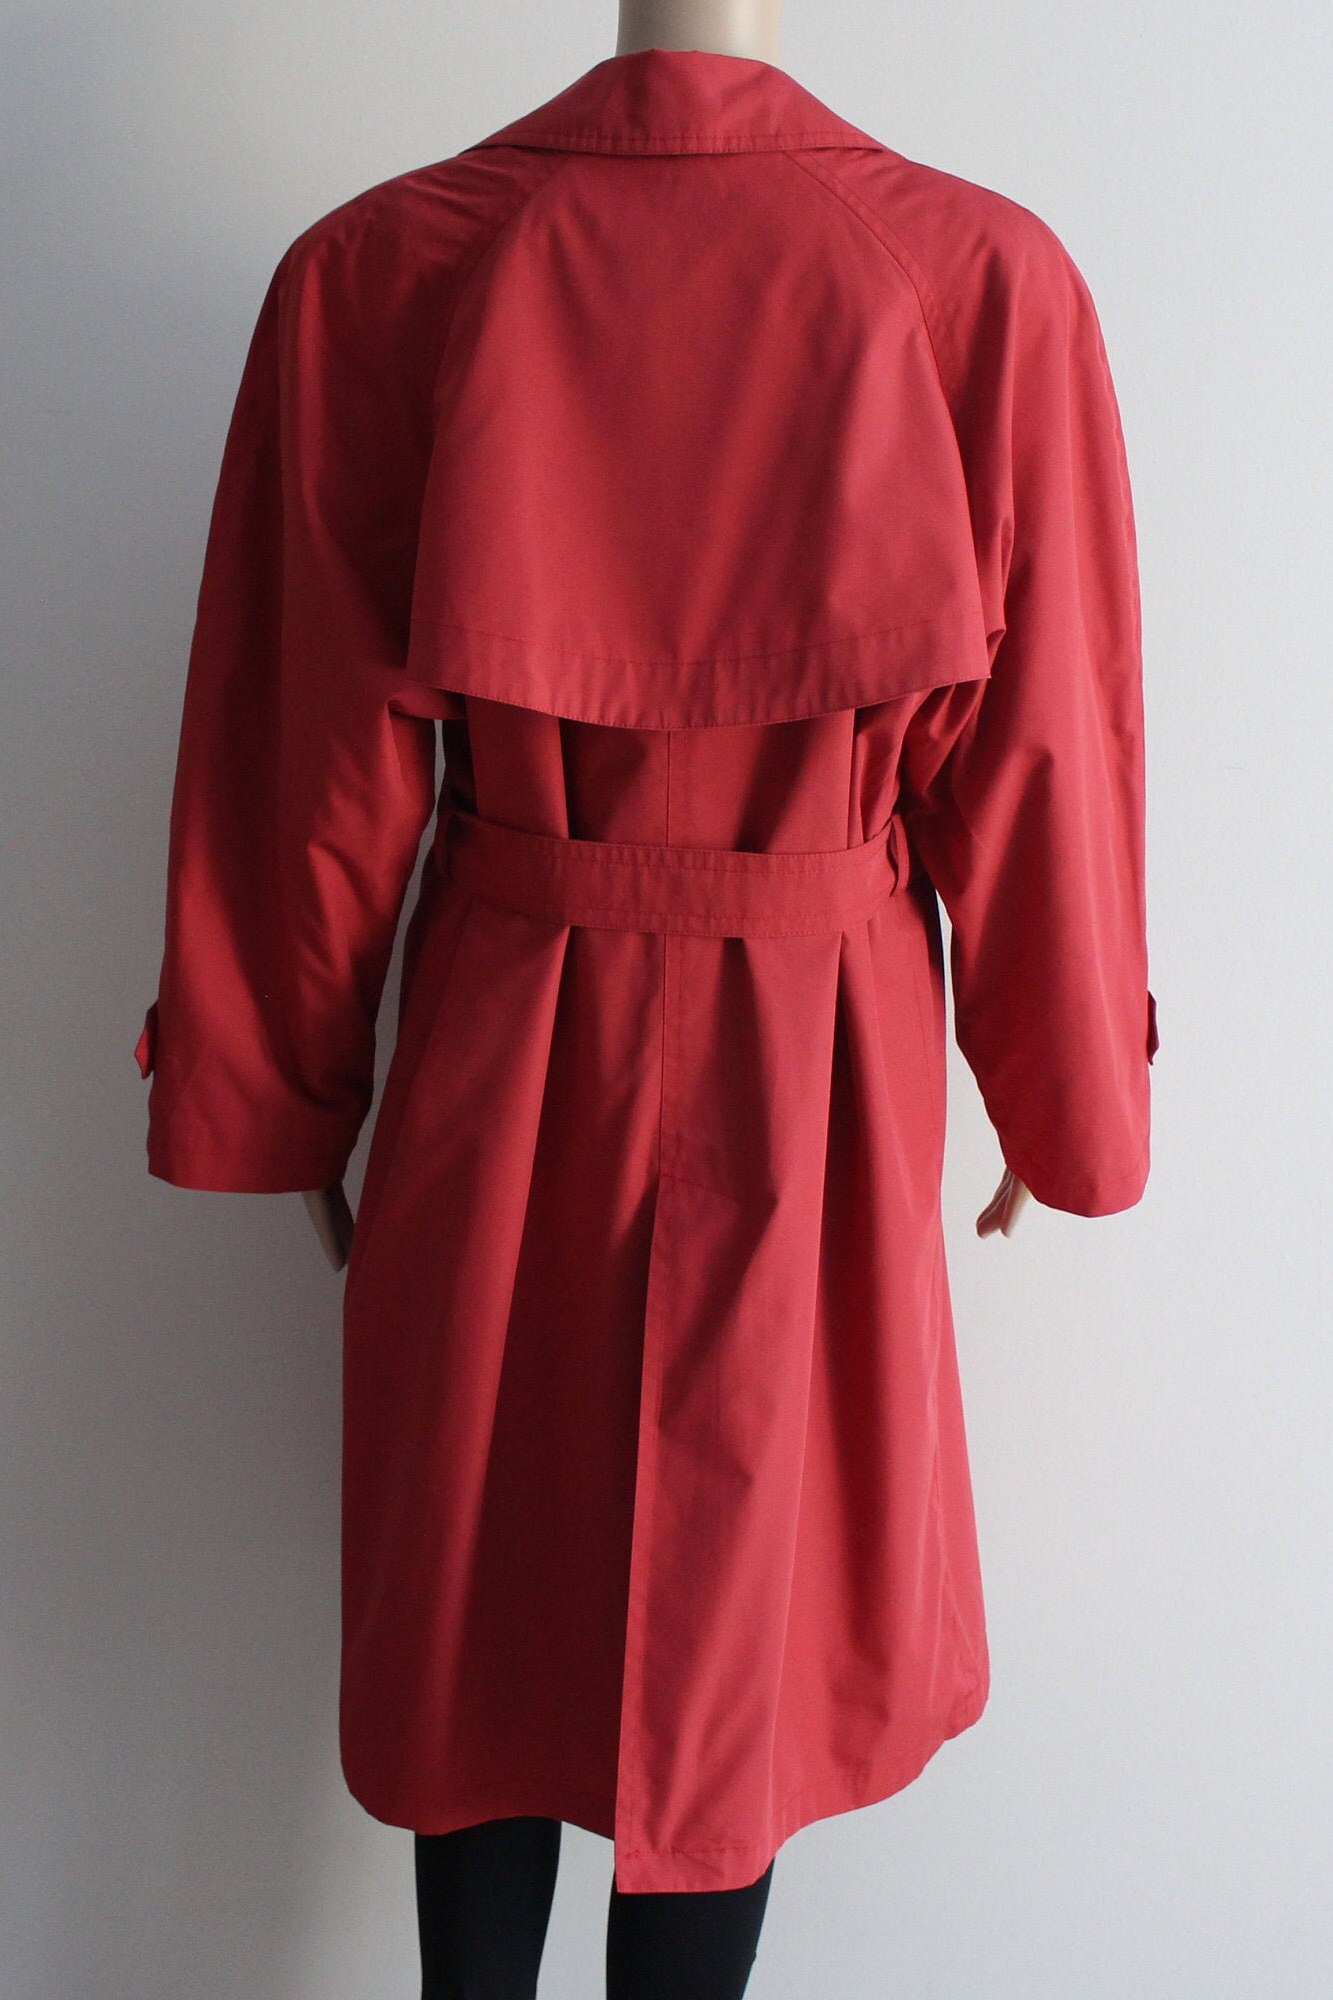 Rust Red Trench Coat Women's Red Coat Vintage Trench Coat | Etsy